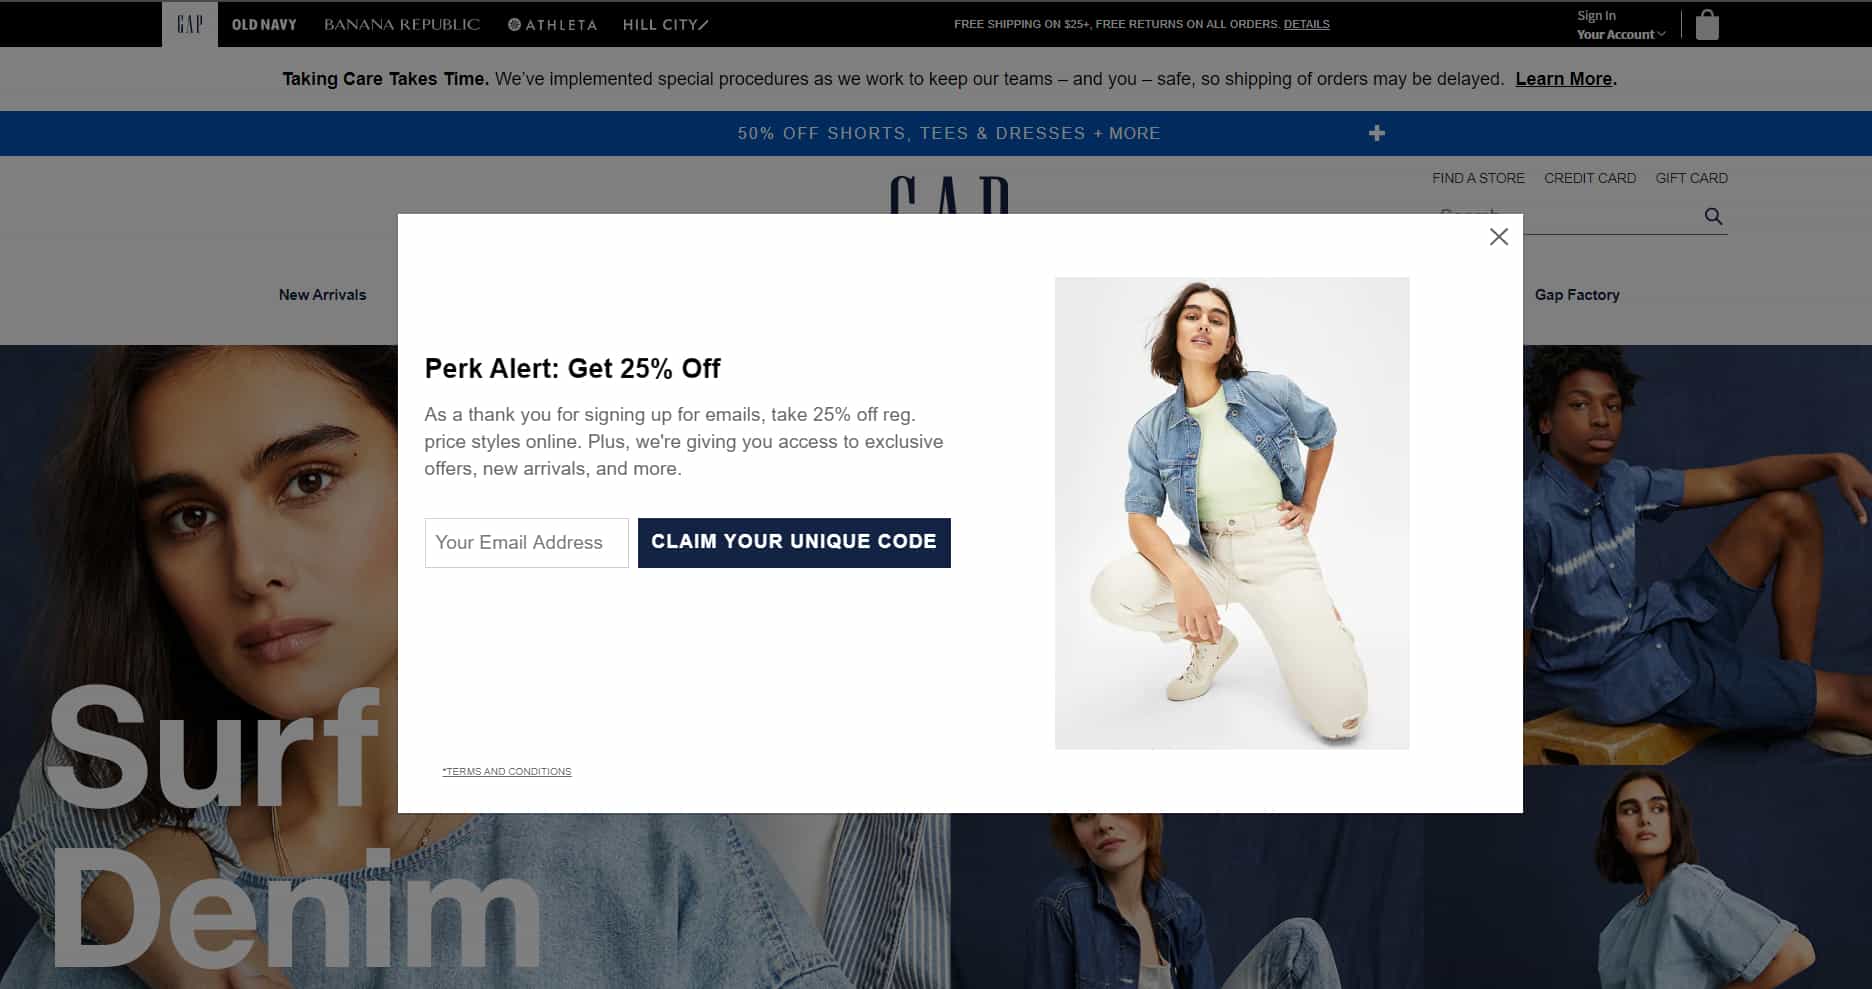 GAP popup to collect email for ecommerce newsletter